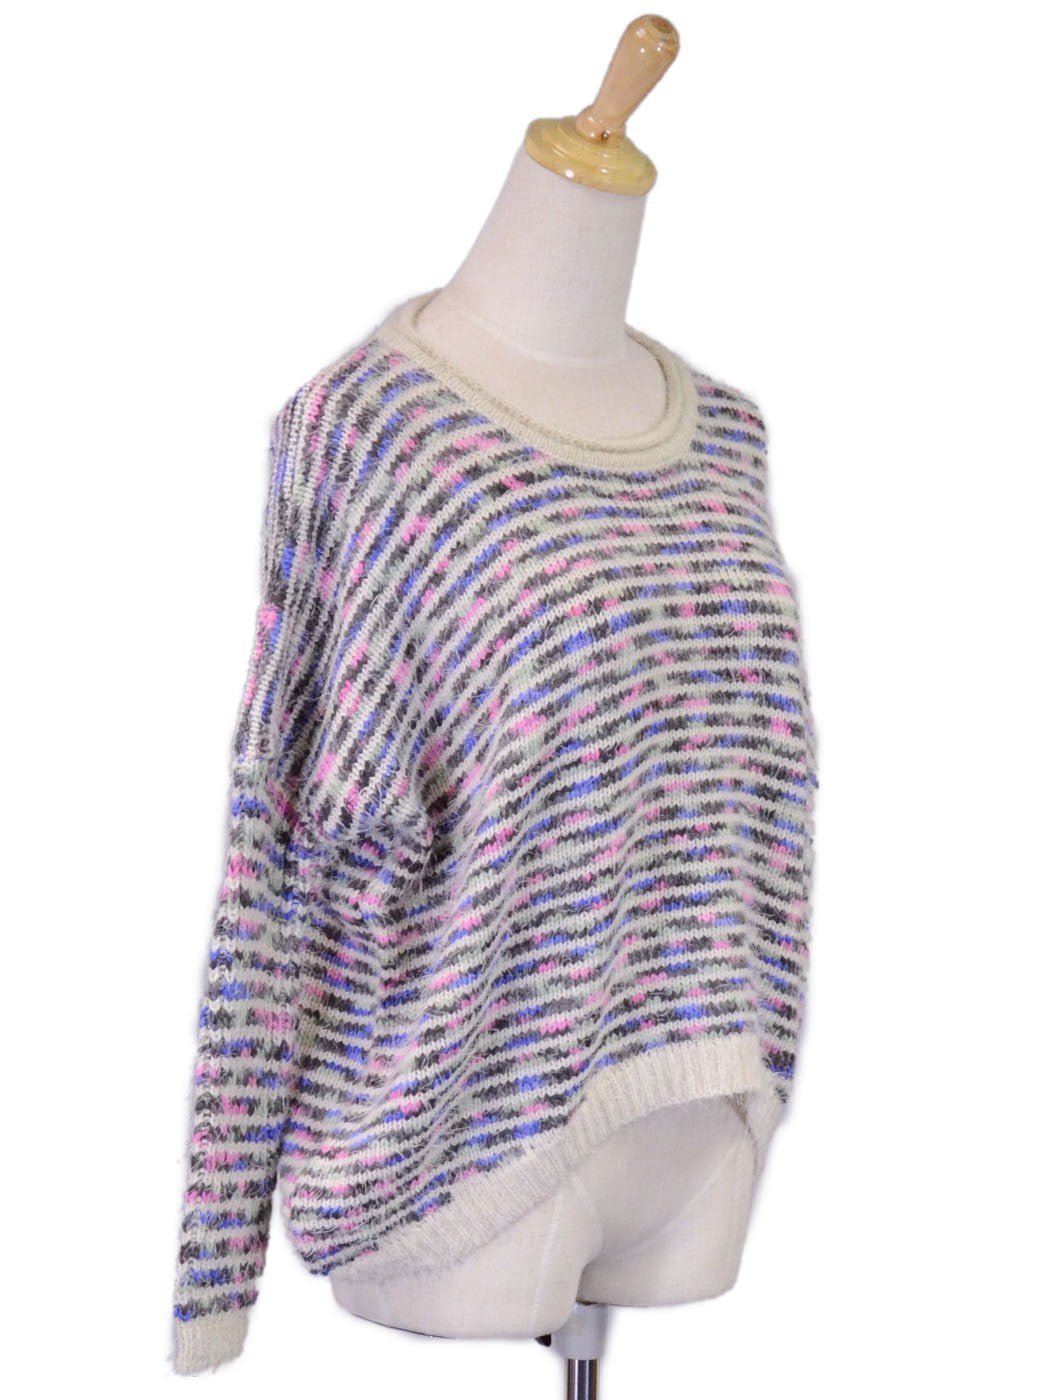 Oxford Circus Fuzzy Cozy Candy Stripes Pullover Long Sleeves Sweater Top